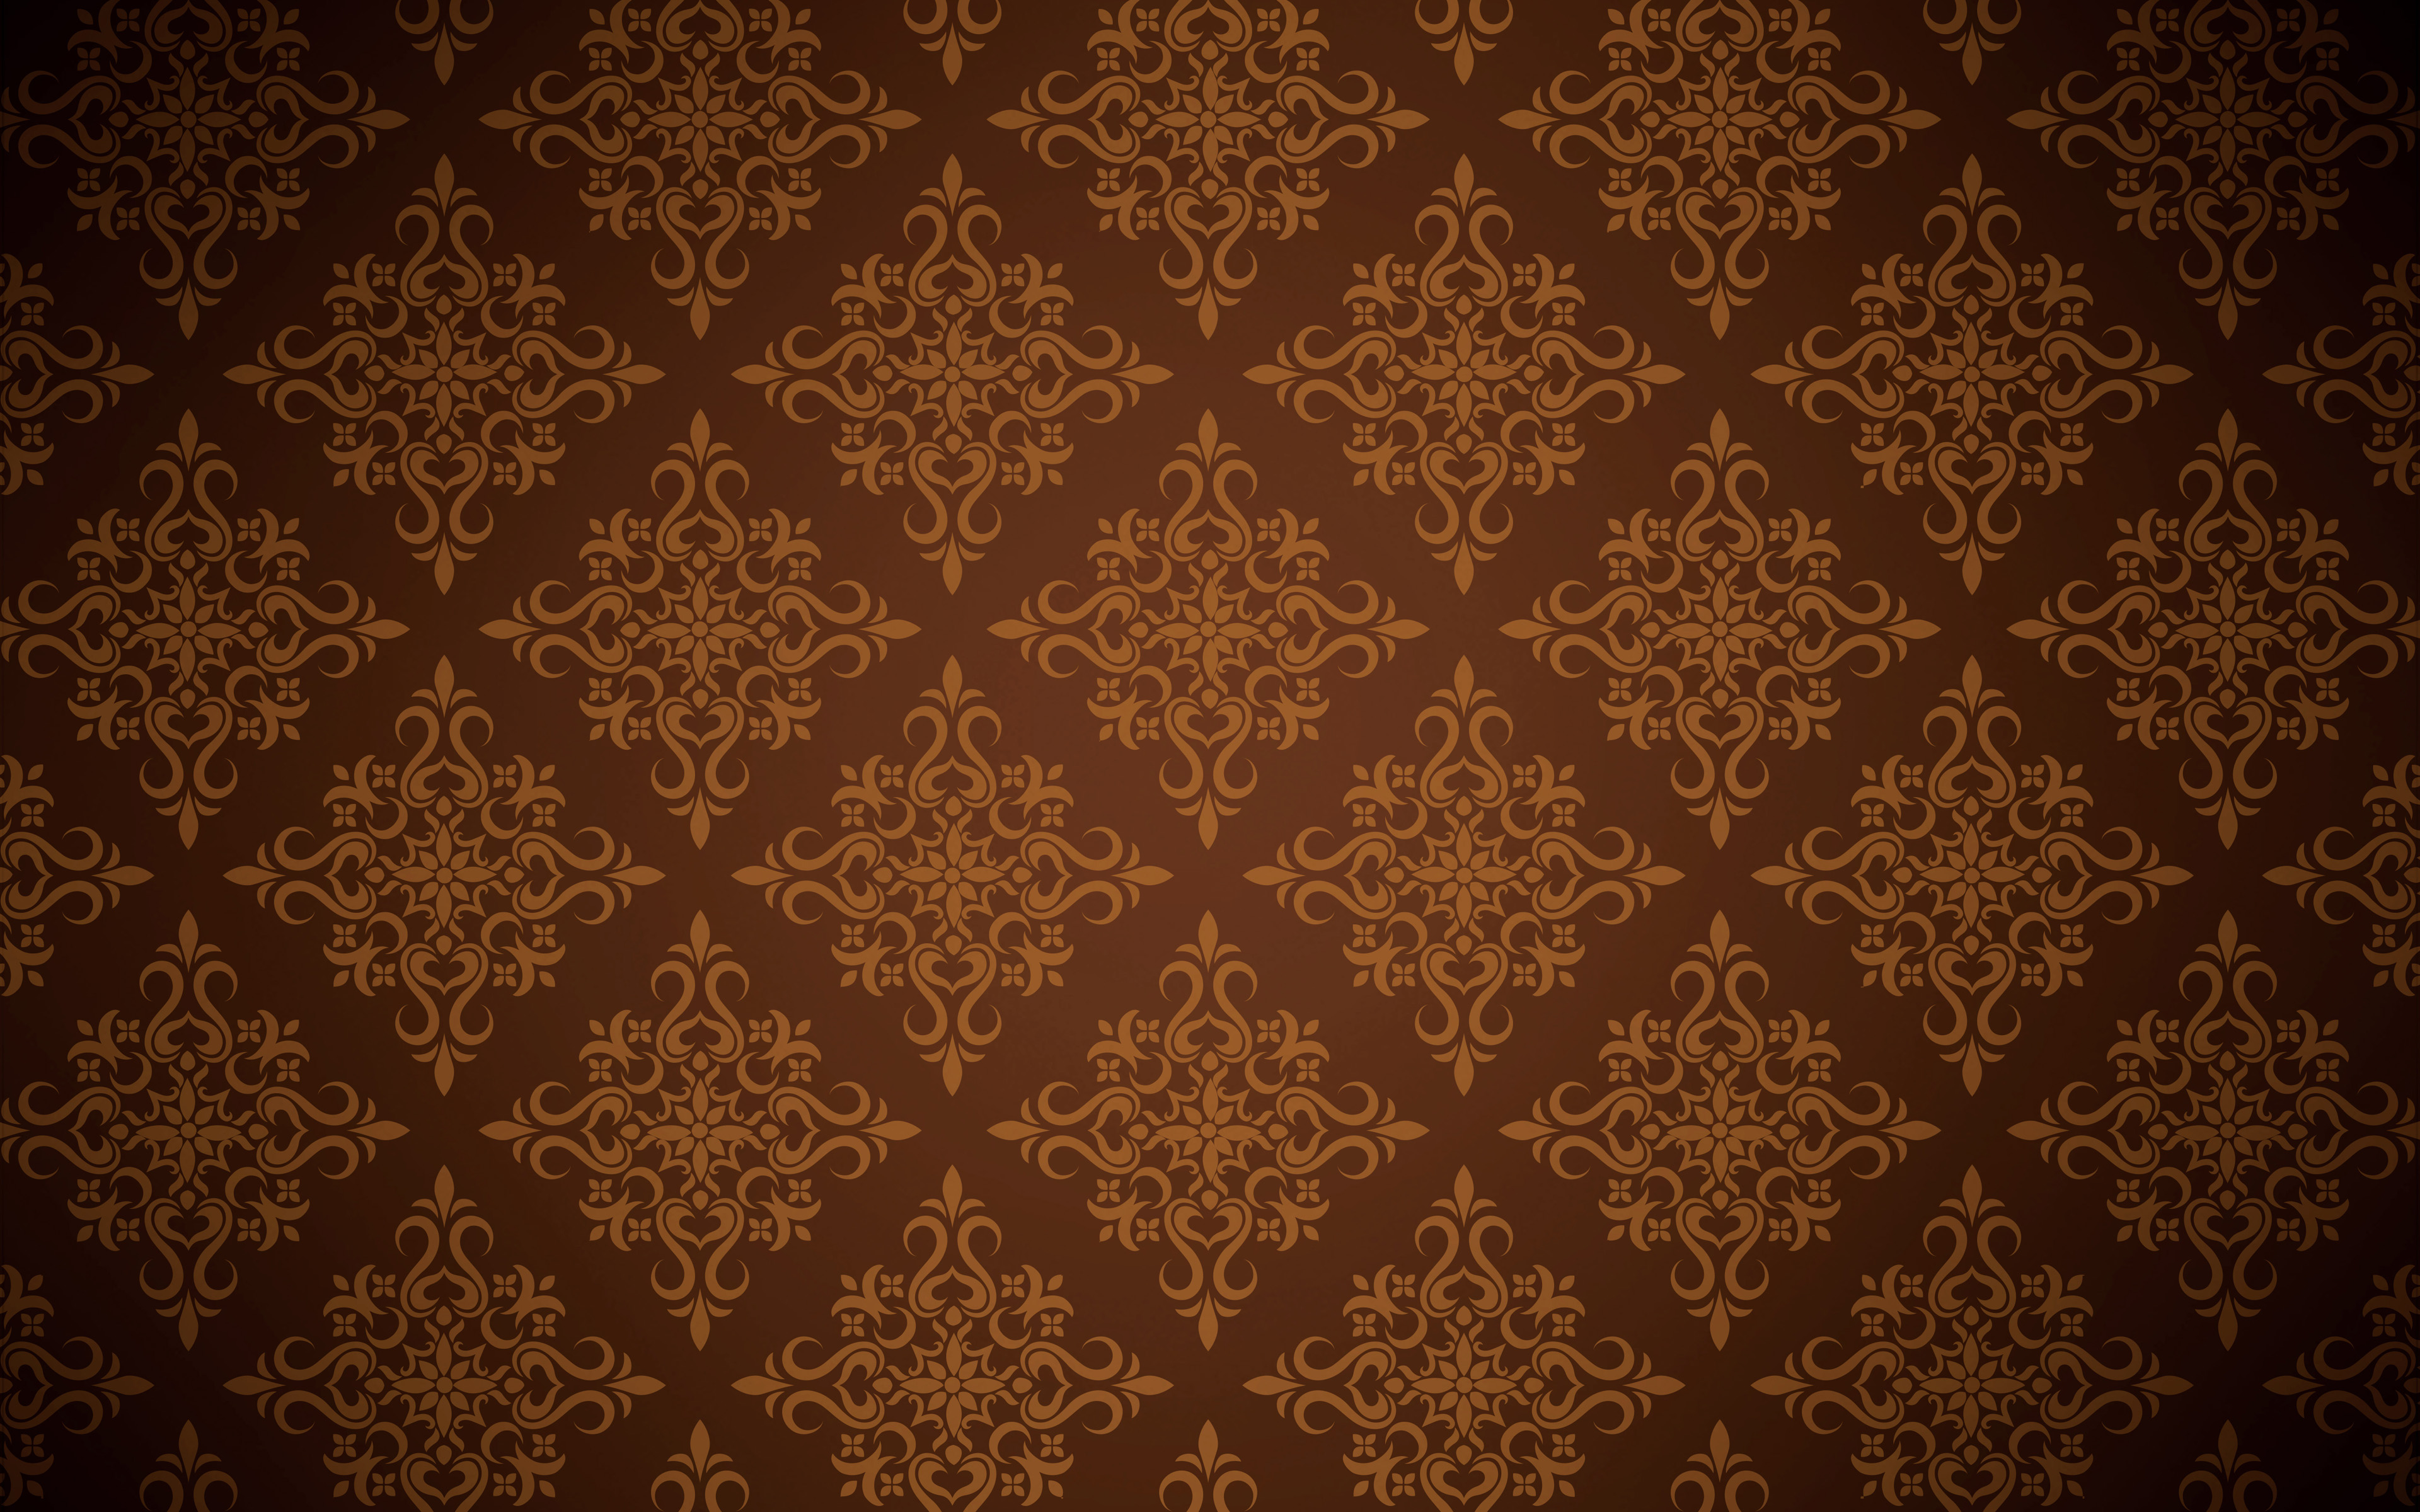 Download wallpaper brown floral pattern, 4k, floral vintage pattern, brown vintage background, floral patterns, vintage background, brown retro background for desktop with resolution 3840x2400. High Quality HD picture wallpaper